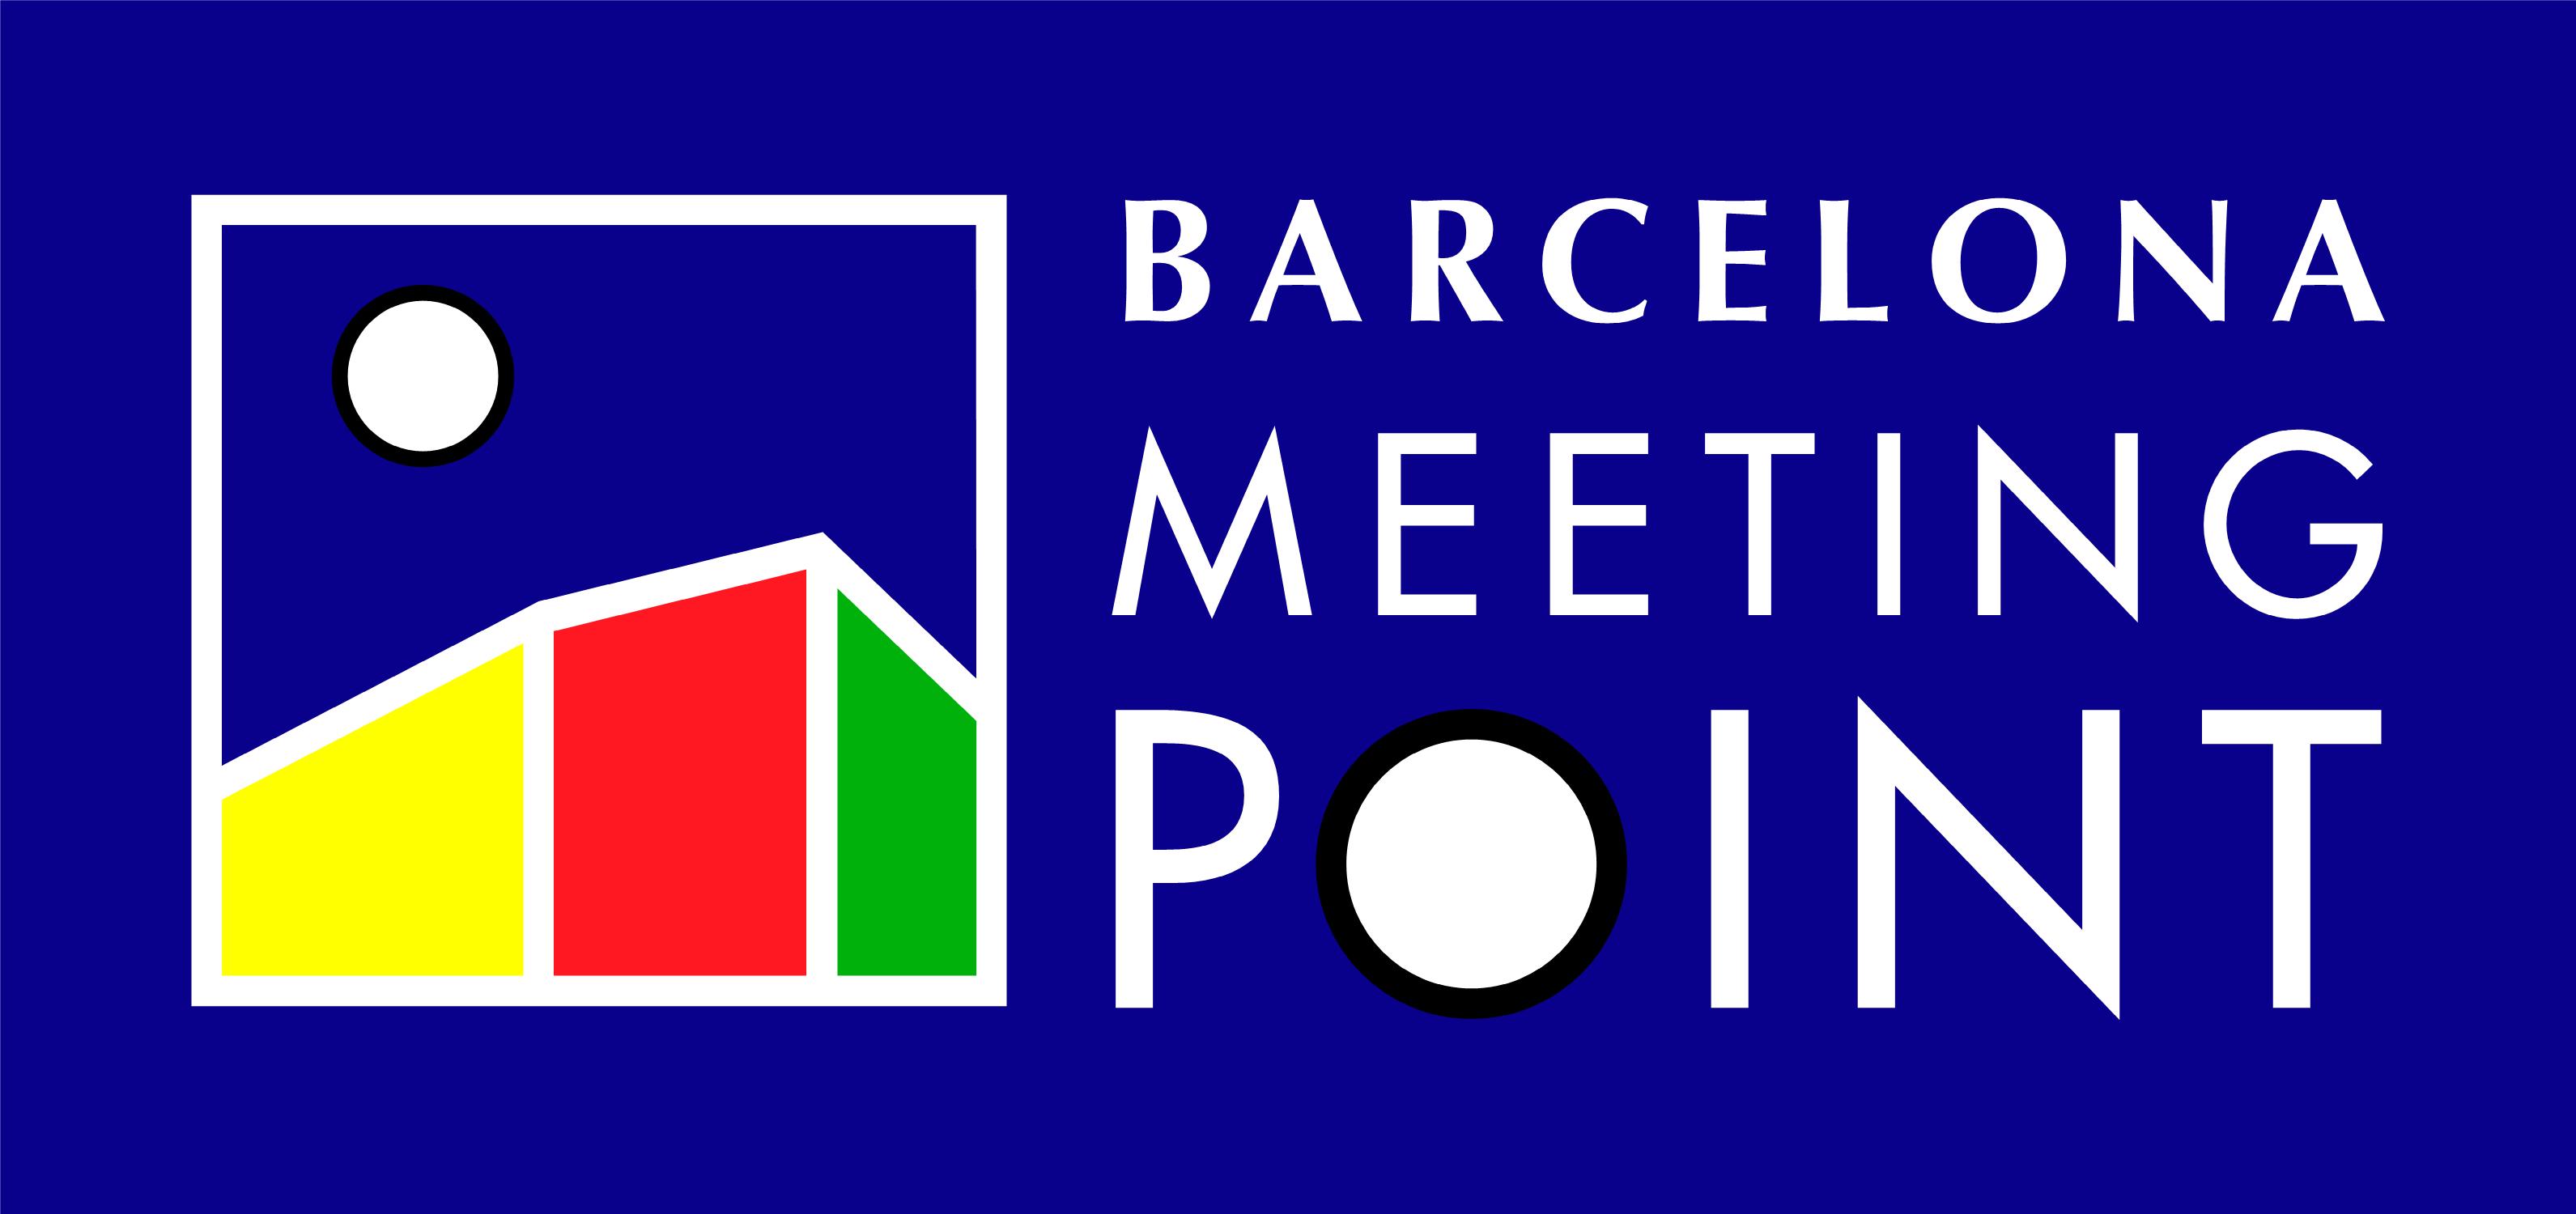 Barcelona Meeting Point 2015